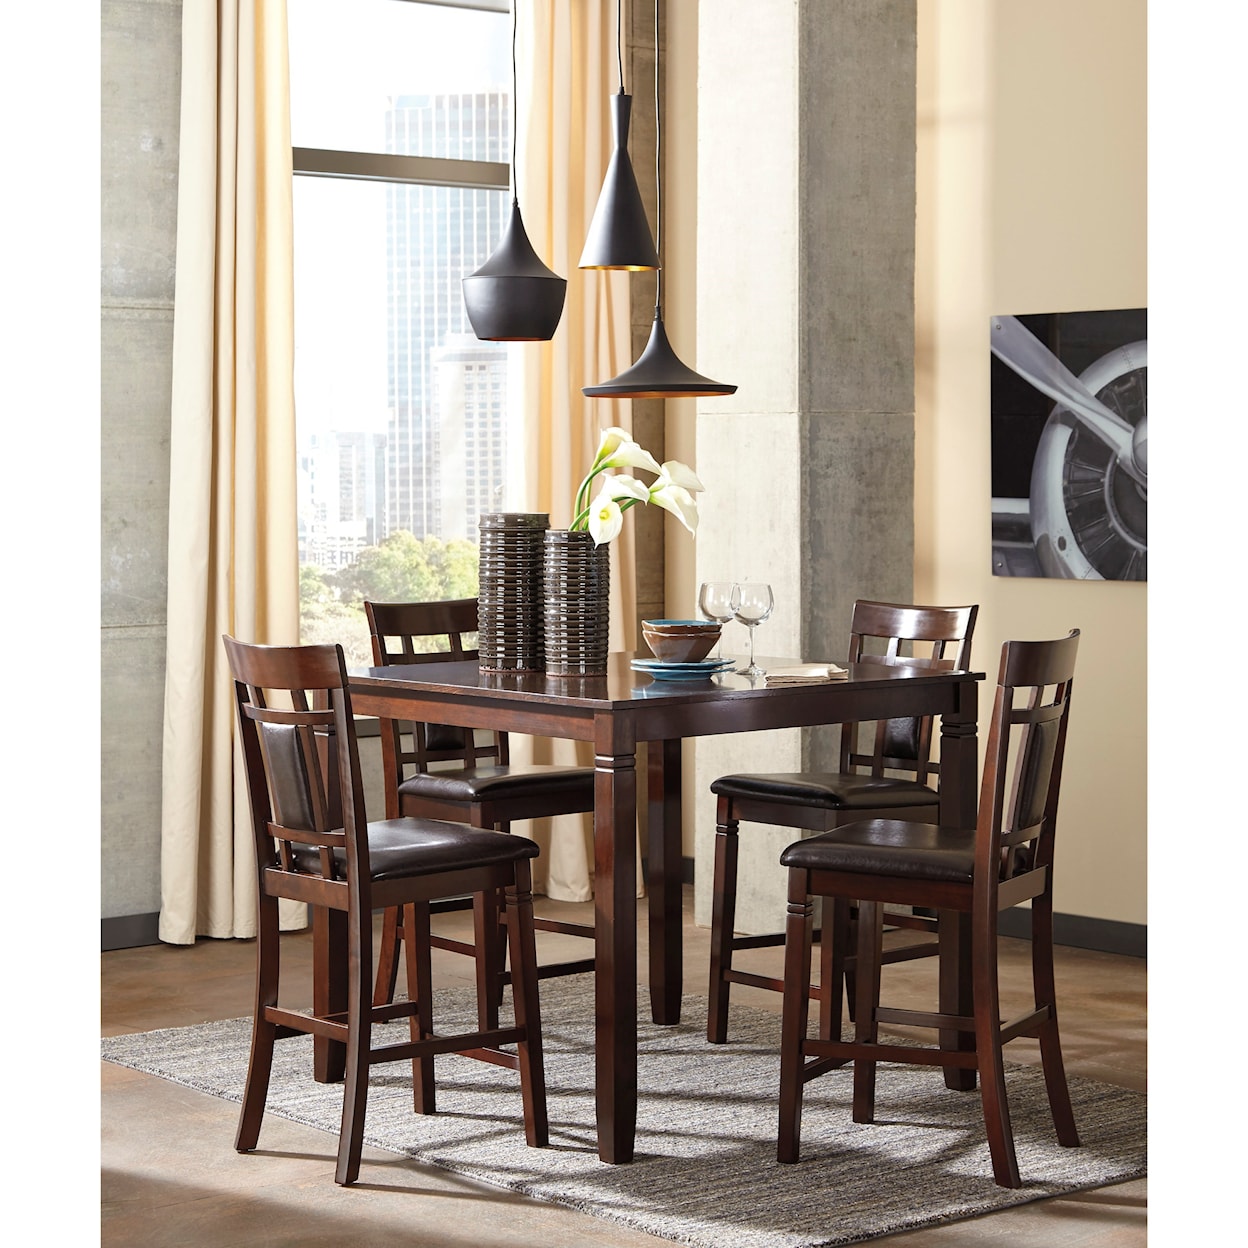 Signature Design by Ashley Furniture Bennox 5-Piece Dining Room Counter Table Set